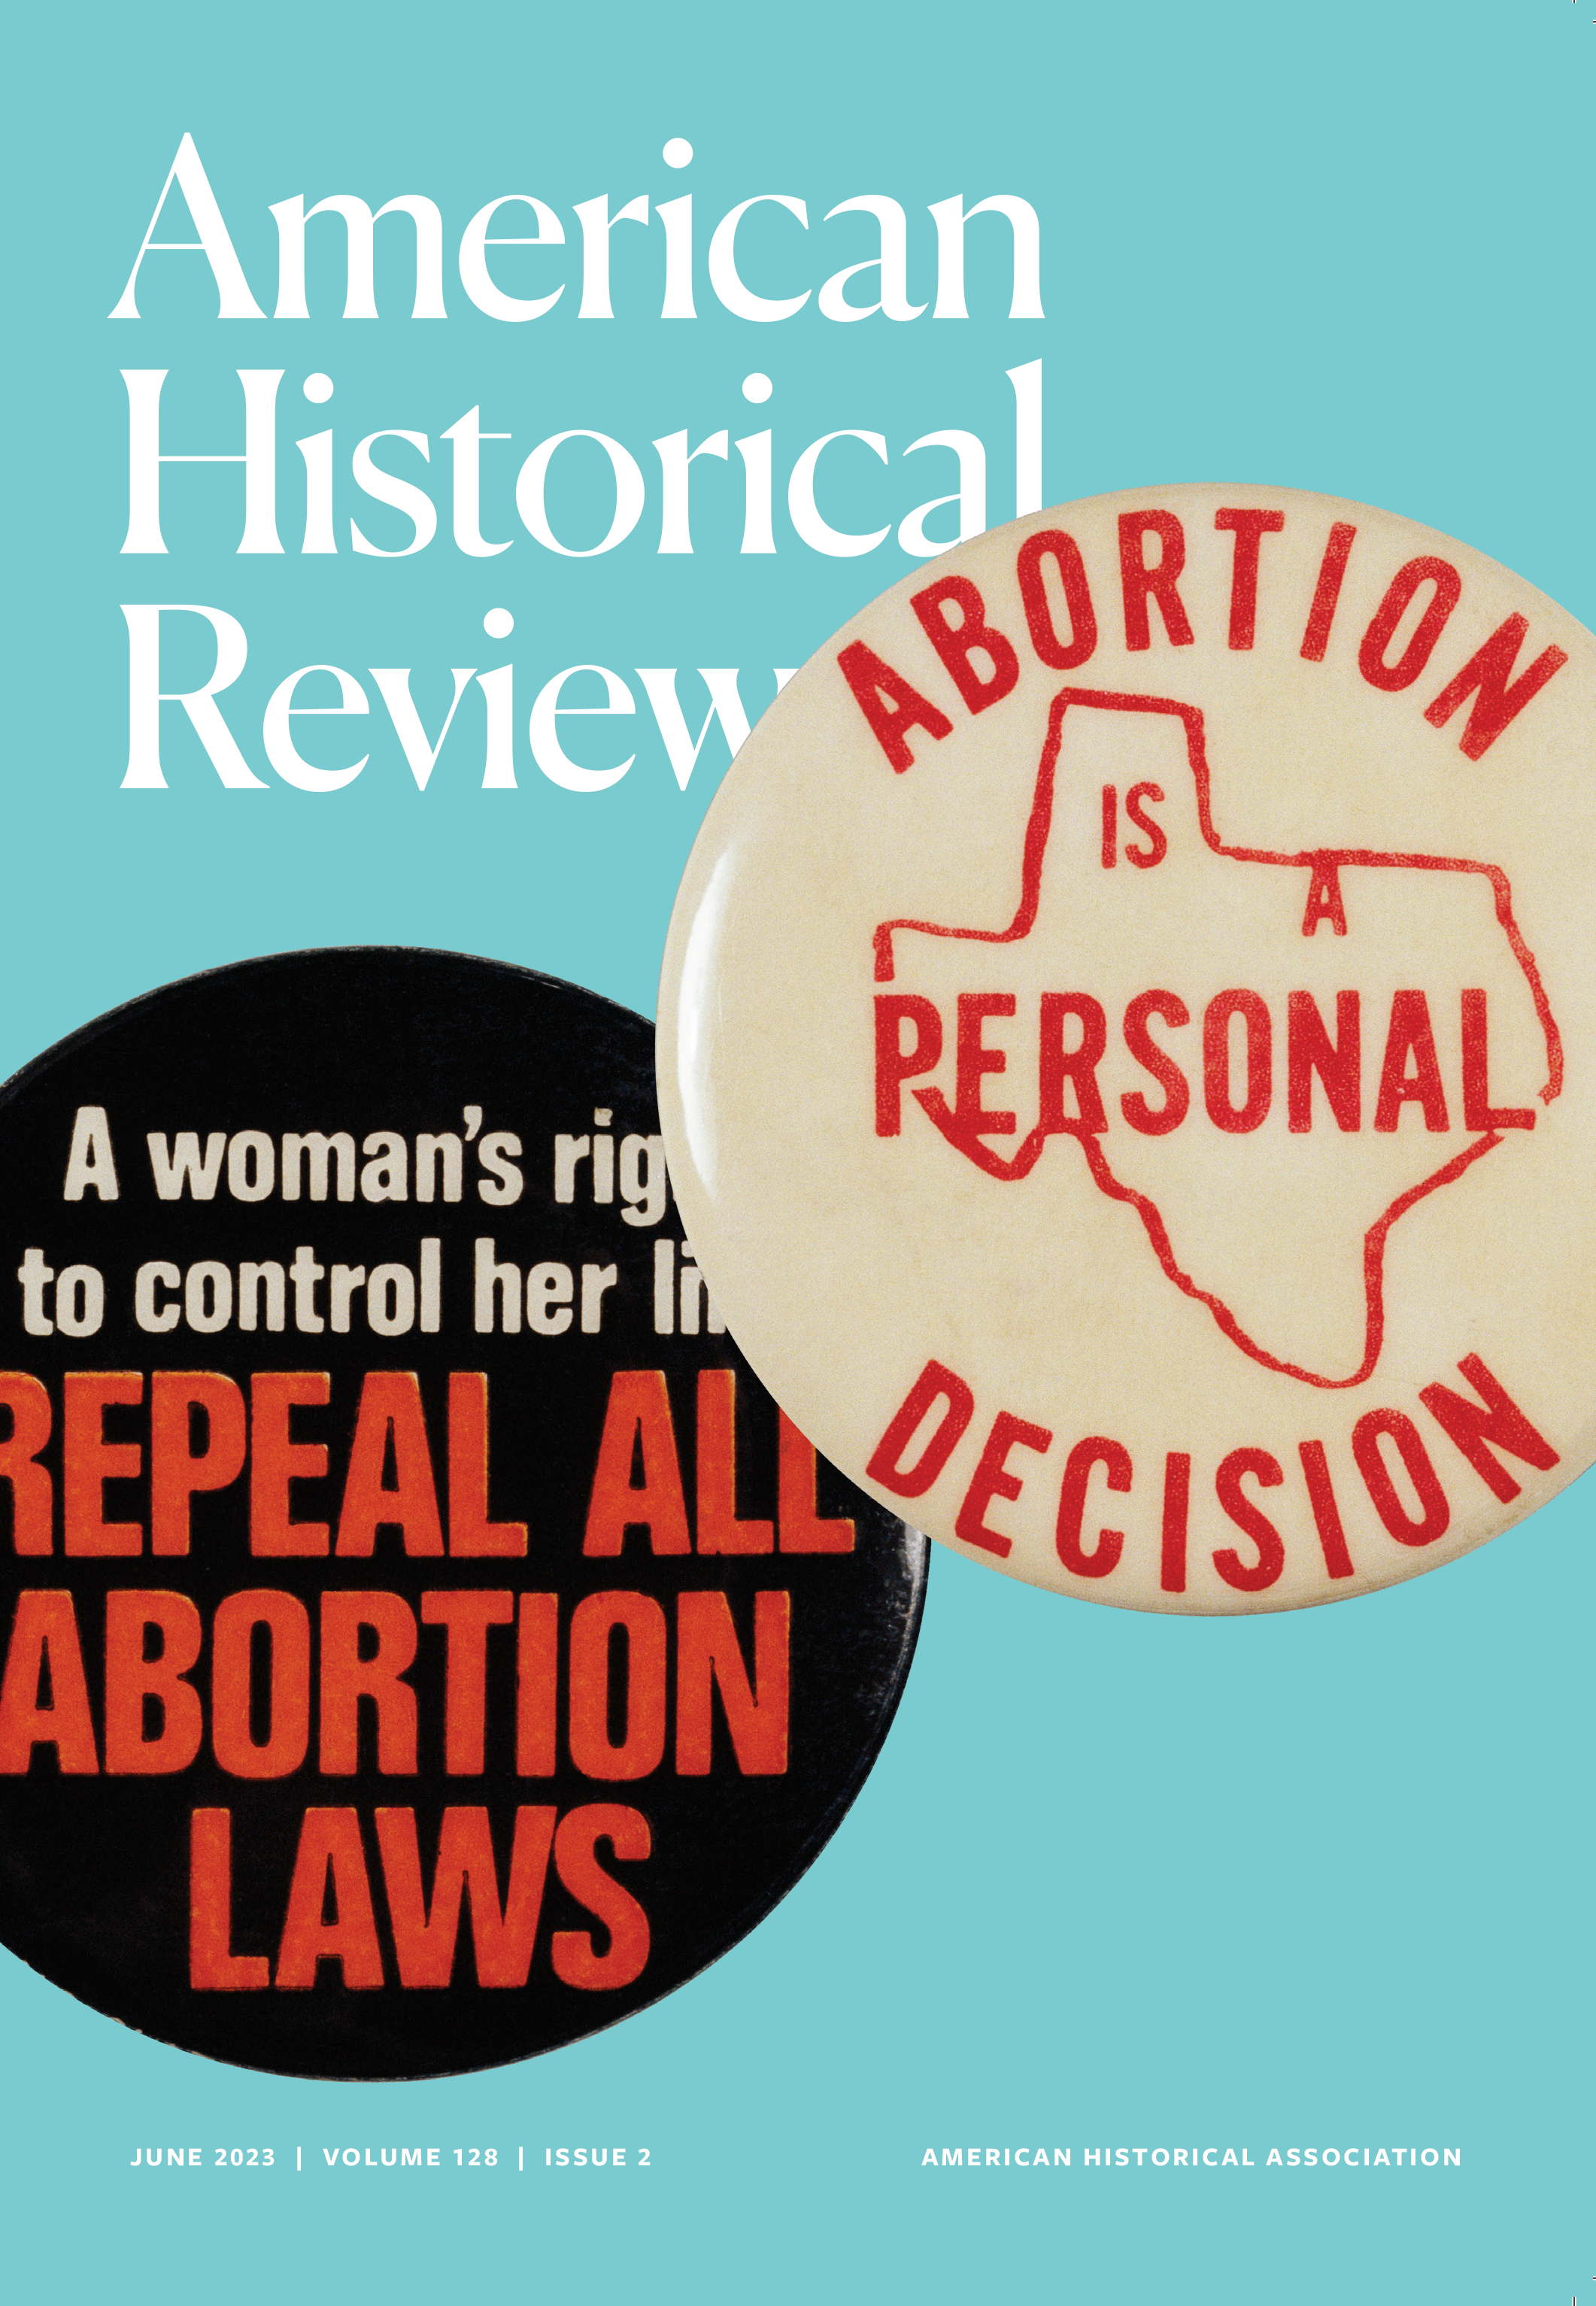 June 2023 cover of the American Historical Review featuring two buttons against a teal background. One button is black, and in white text says 